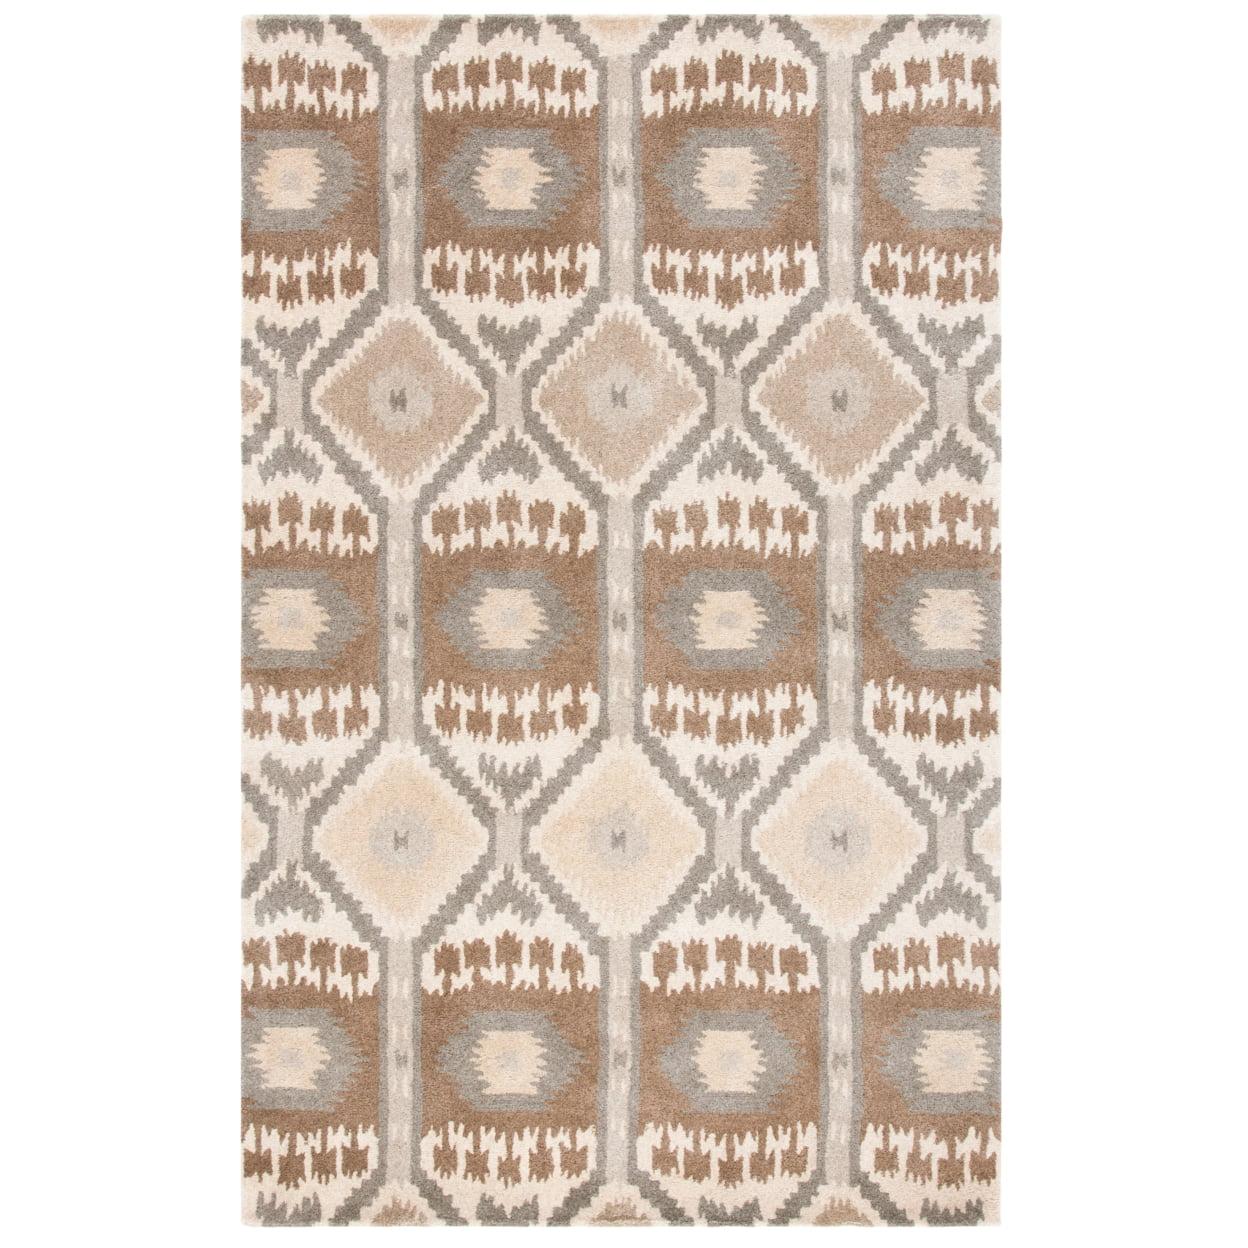 Ivory Elegance Hand-Tufted Wool and Viscose 5' x 8' Area Rug